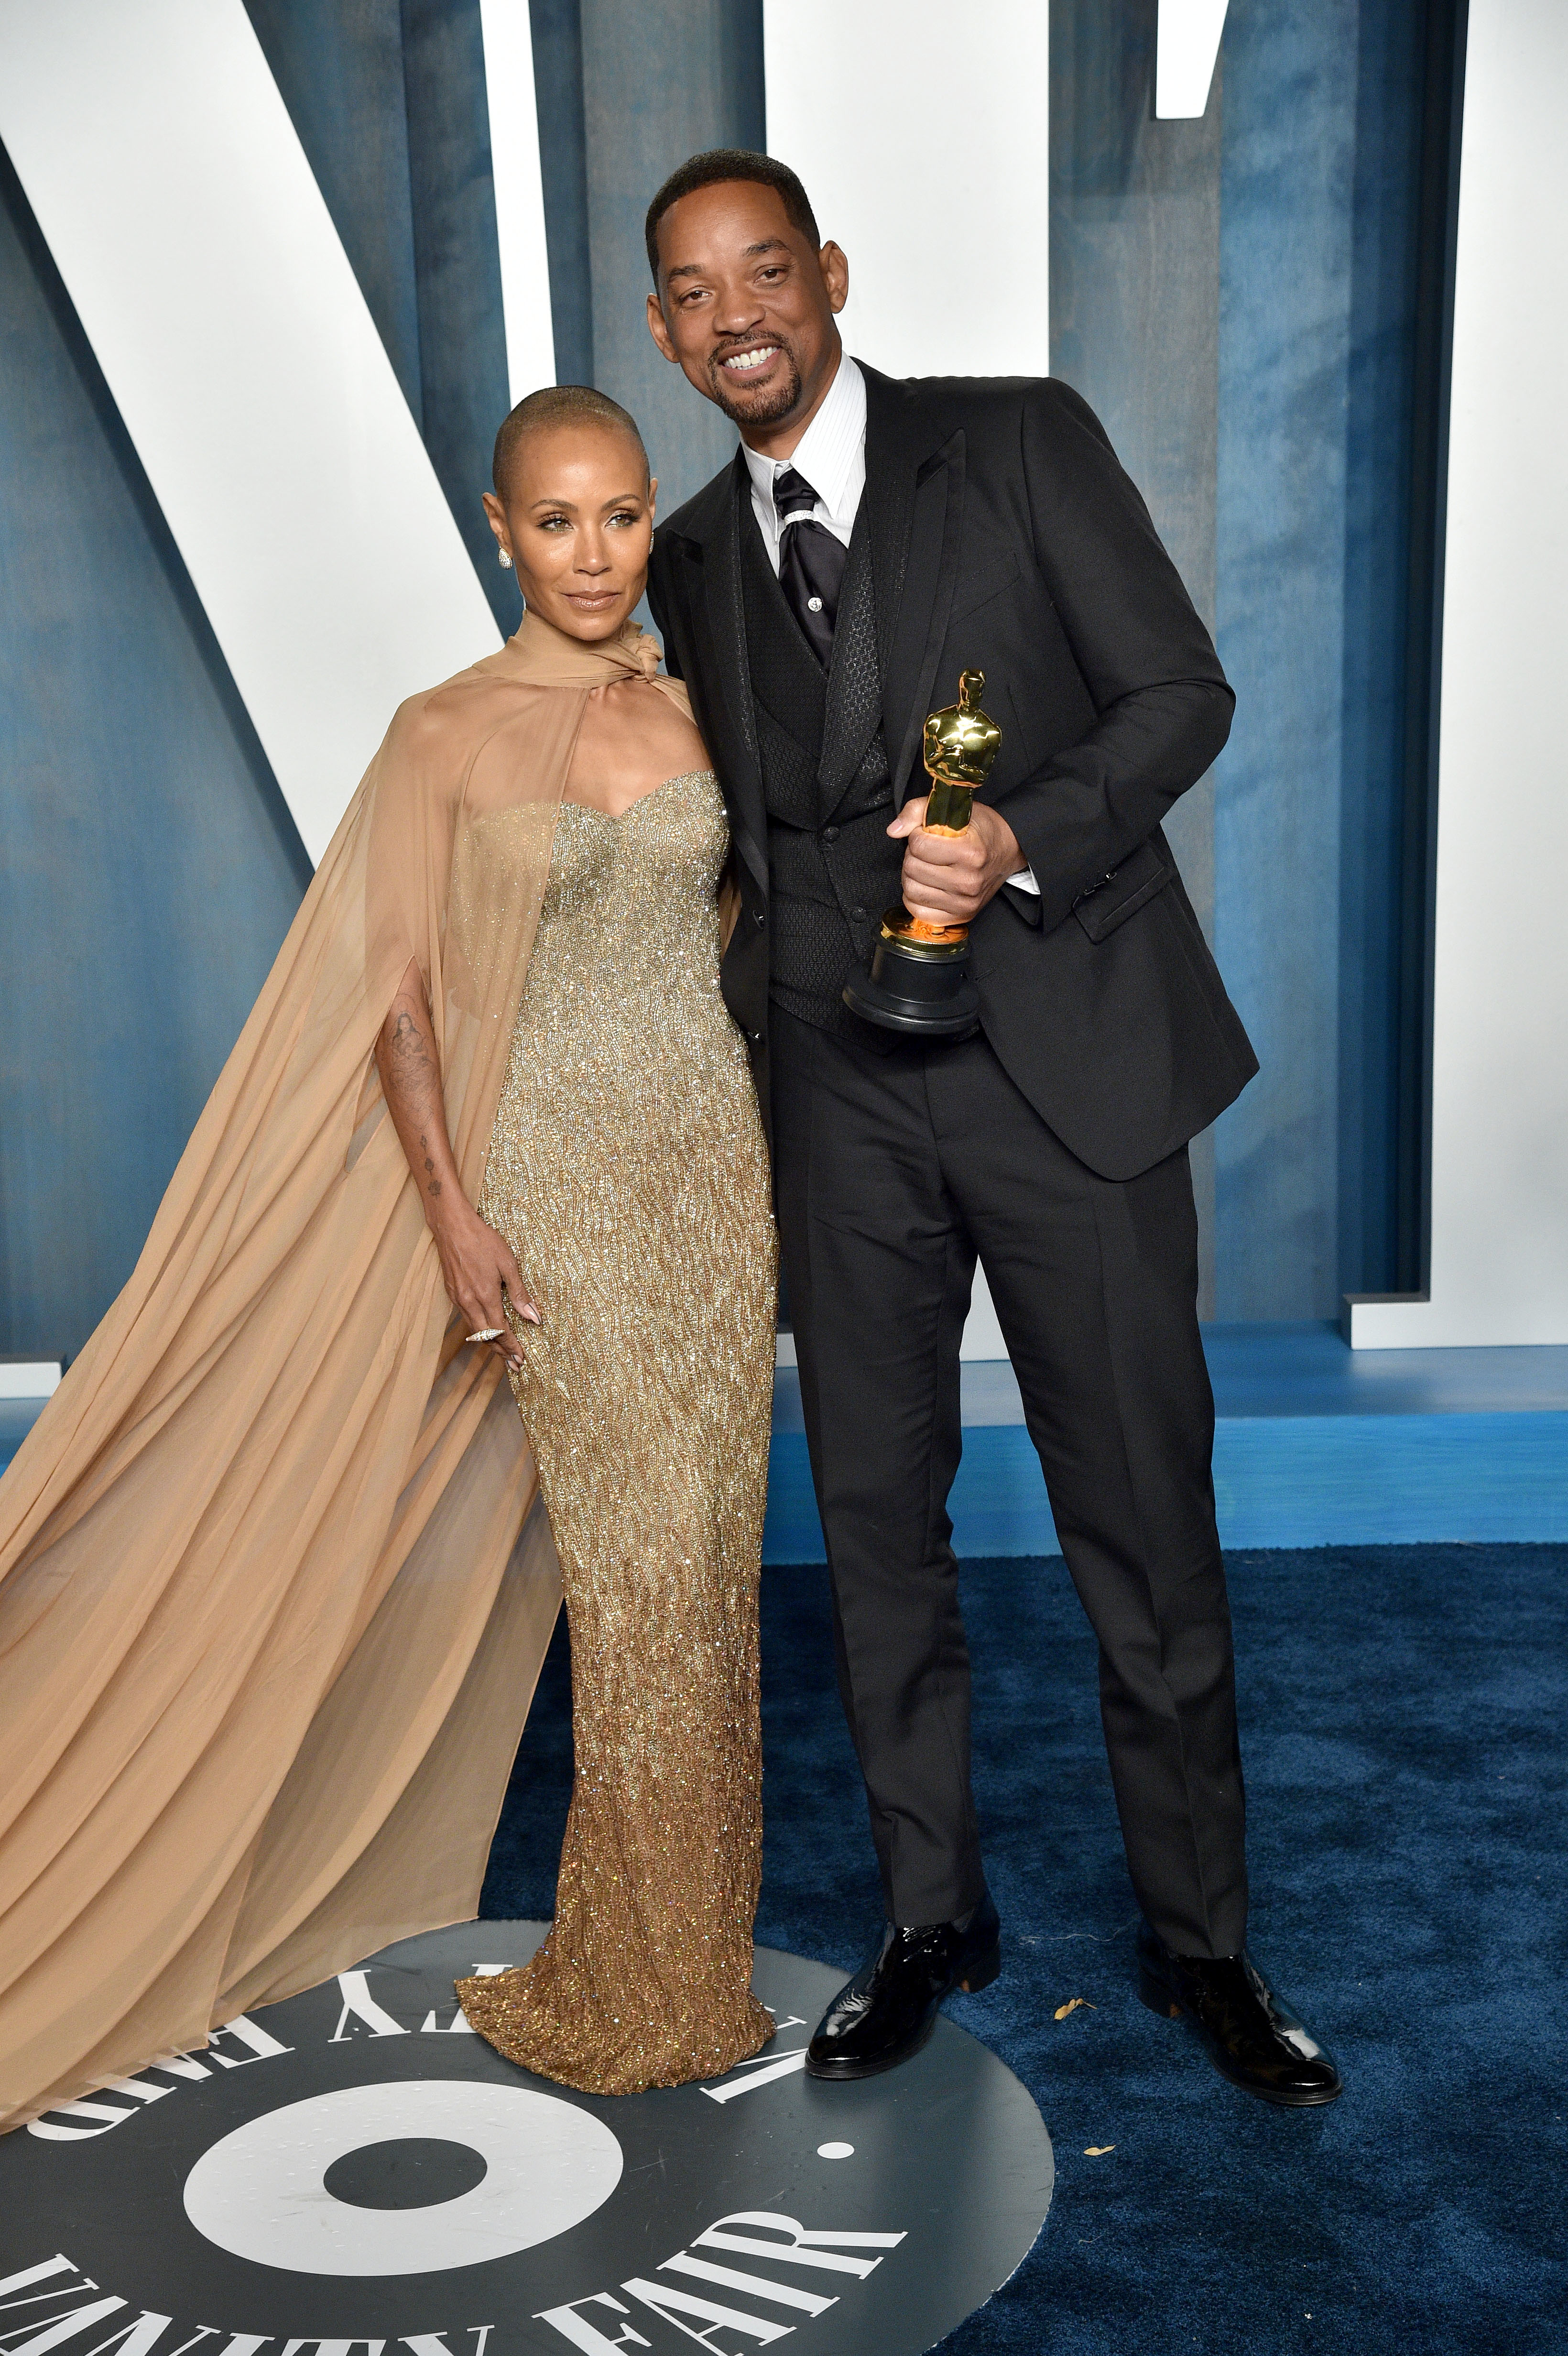 Close-up of Jada and Will, who is holding an award, at a media event